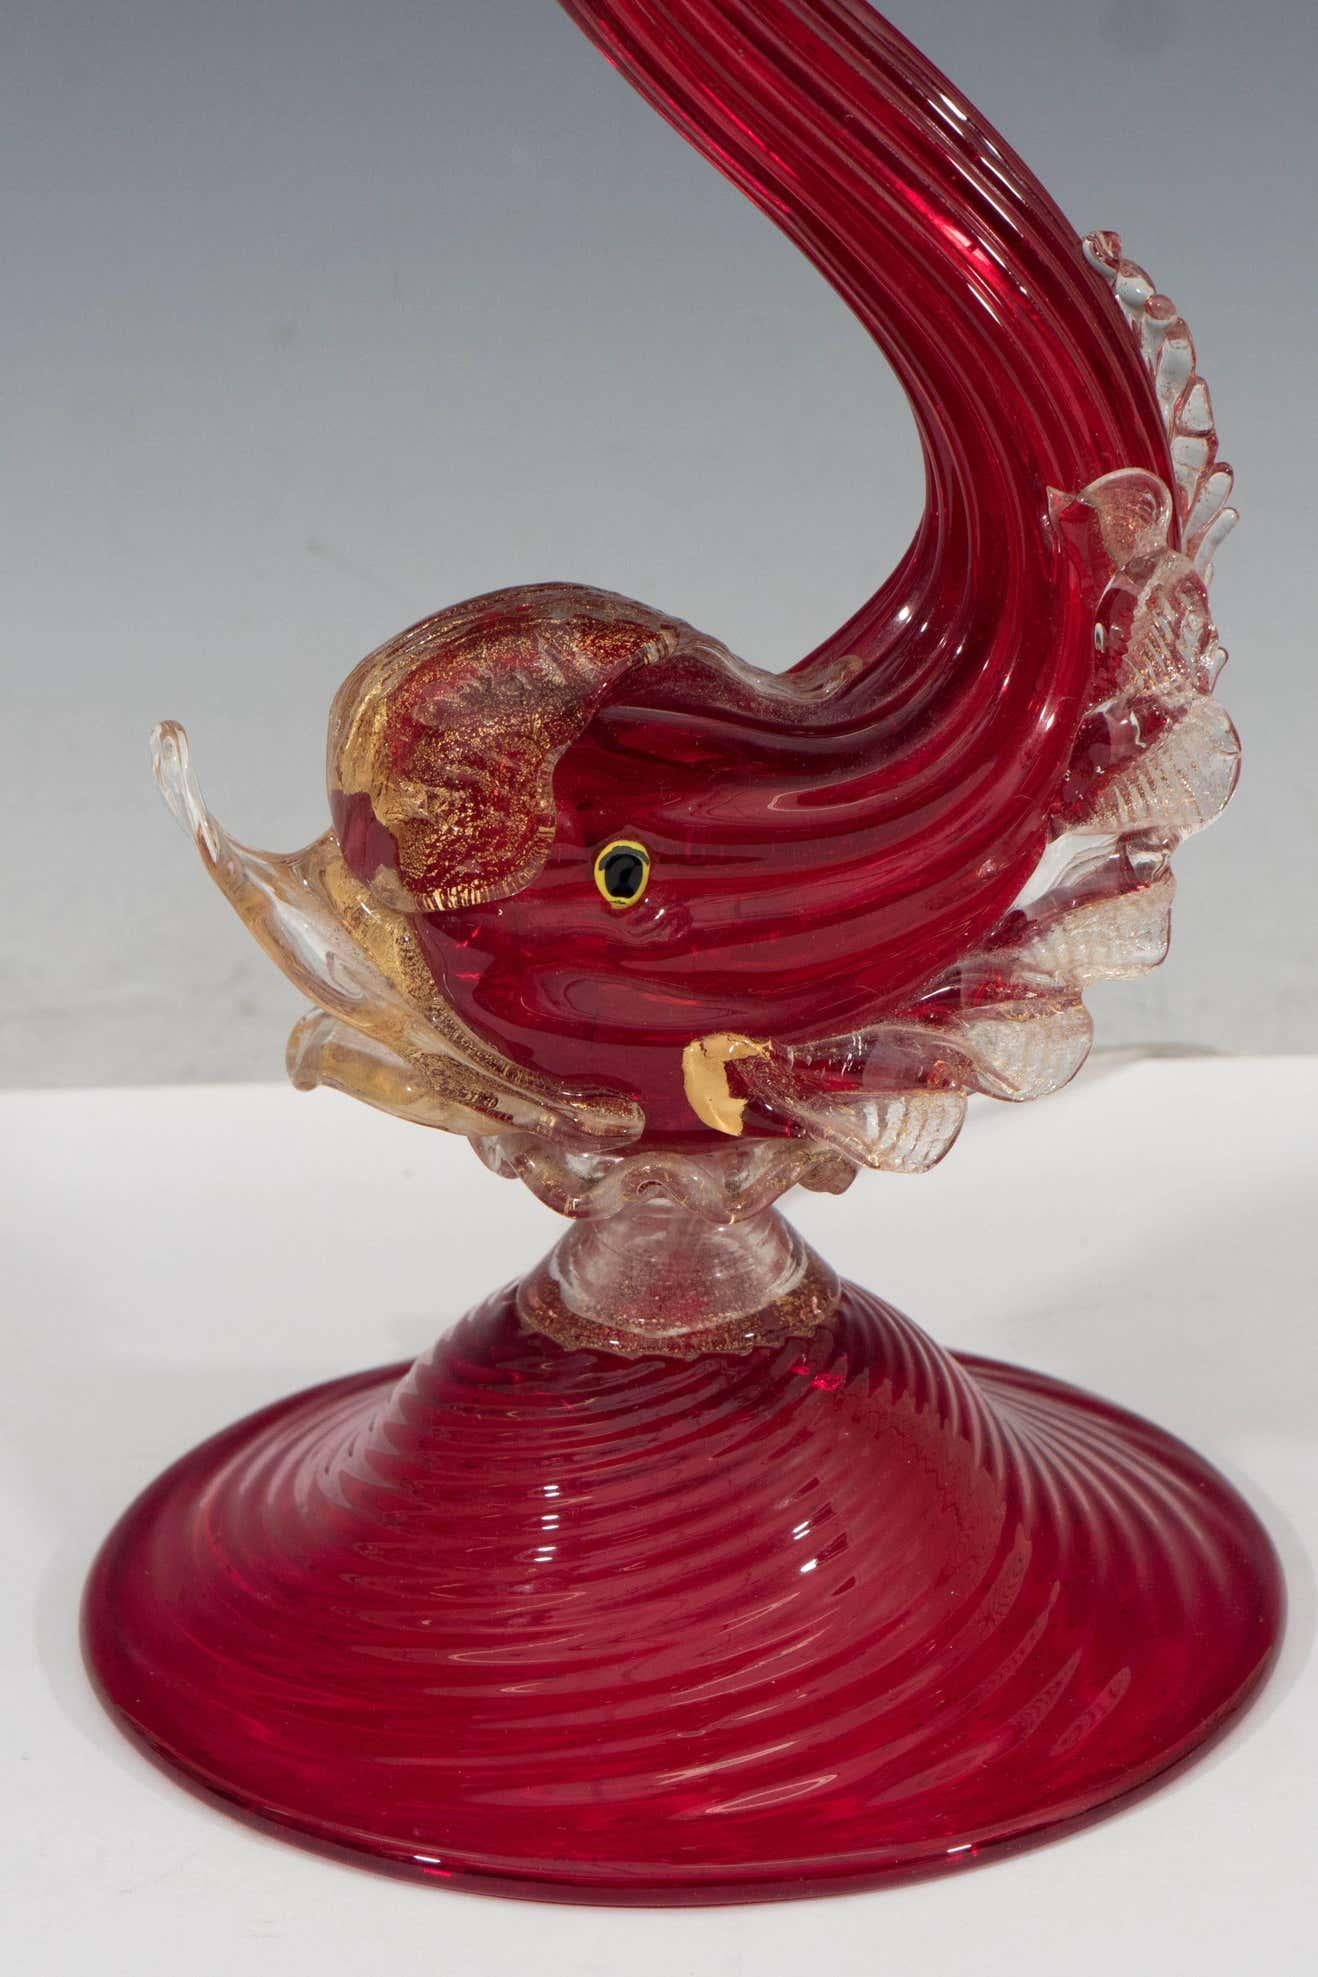 Hollywood Regency style table lamp in Murano glass, attributed to Barovier e Toso and produced circa 1940s, designed as a red glass fish with applied clear polvere o’oro glass fins, lips and tail.

Dealer: S107AB